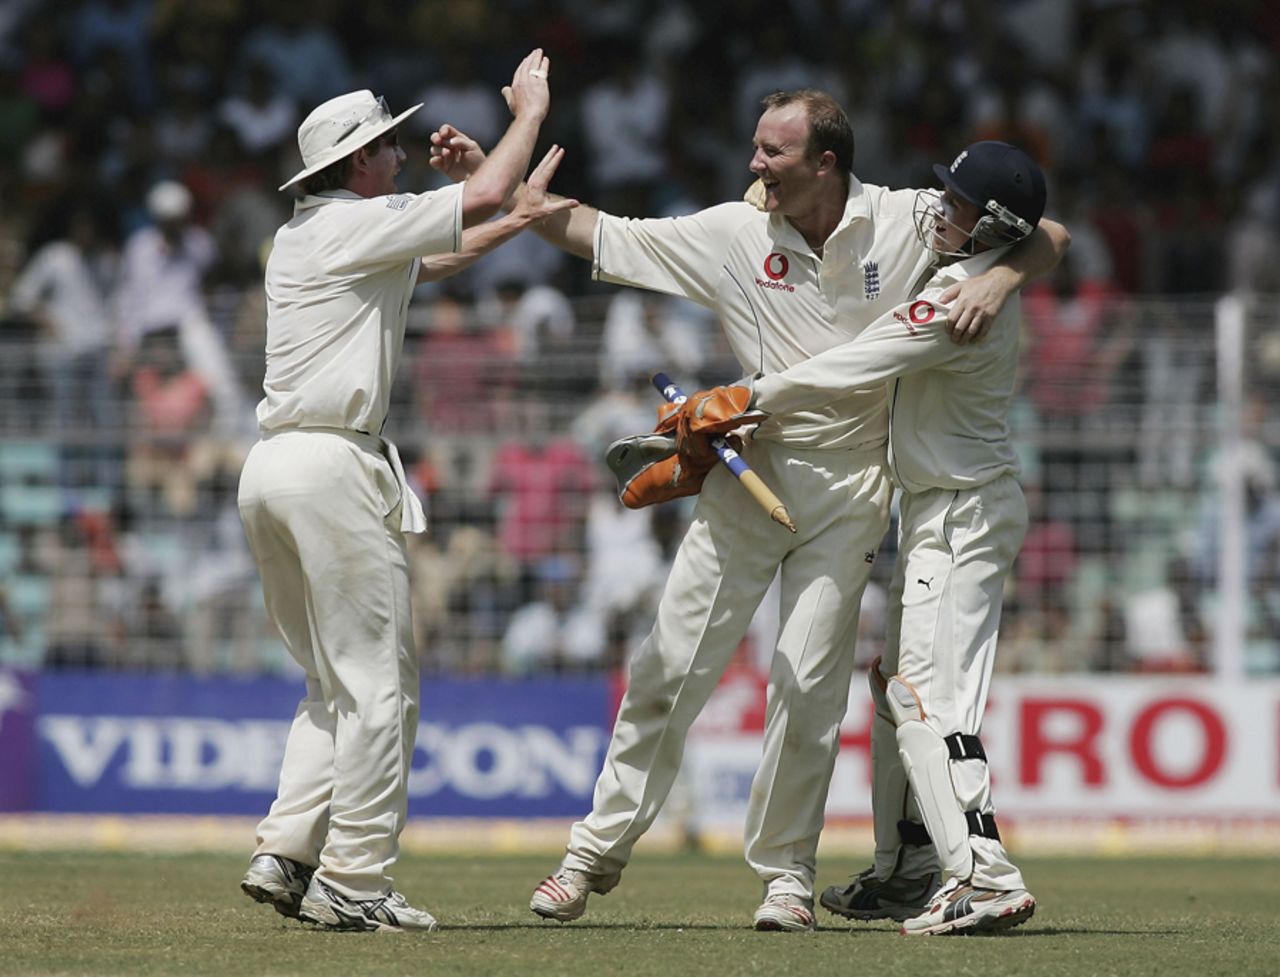 Shaun Udal celebrates with team-mates after taking the winning wicket, India v England, 3rd Test, Mumbai, 5th day, March 22, 2006